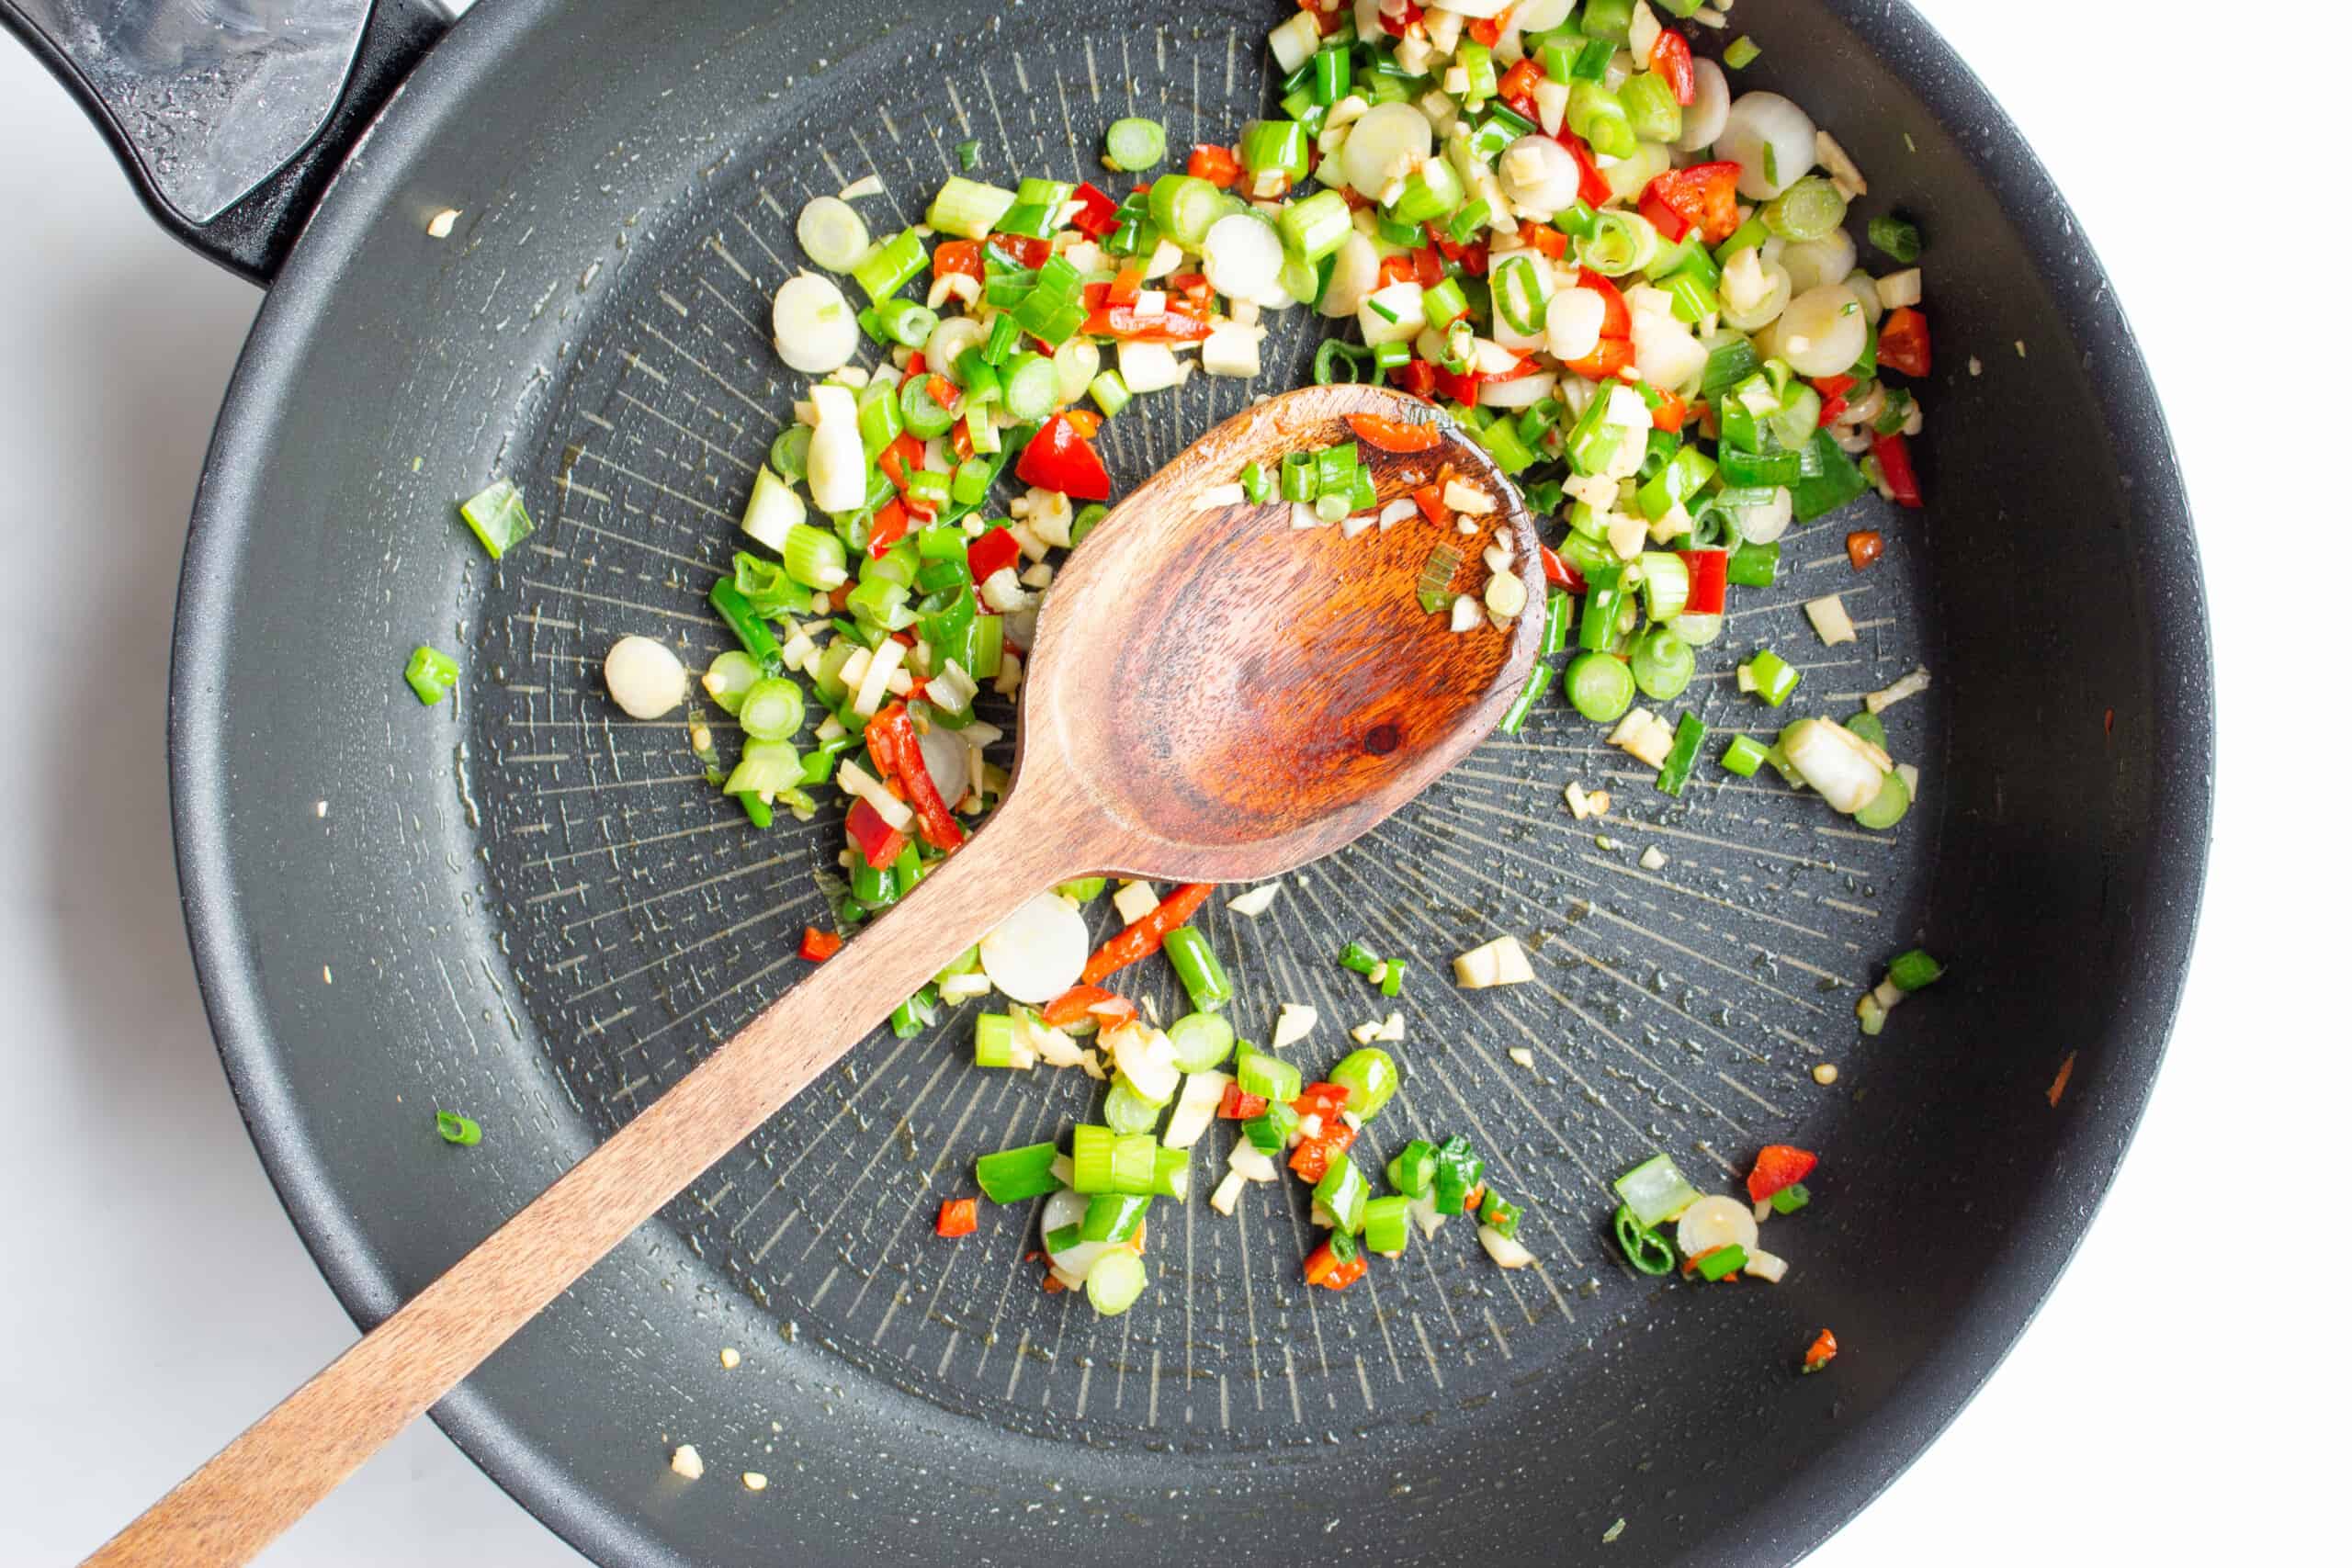 Slices of chillies, garlic and spring onions in a black pan with a wooden spoon.